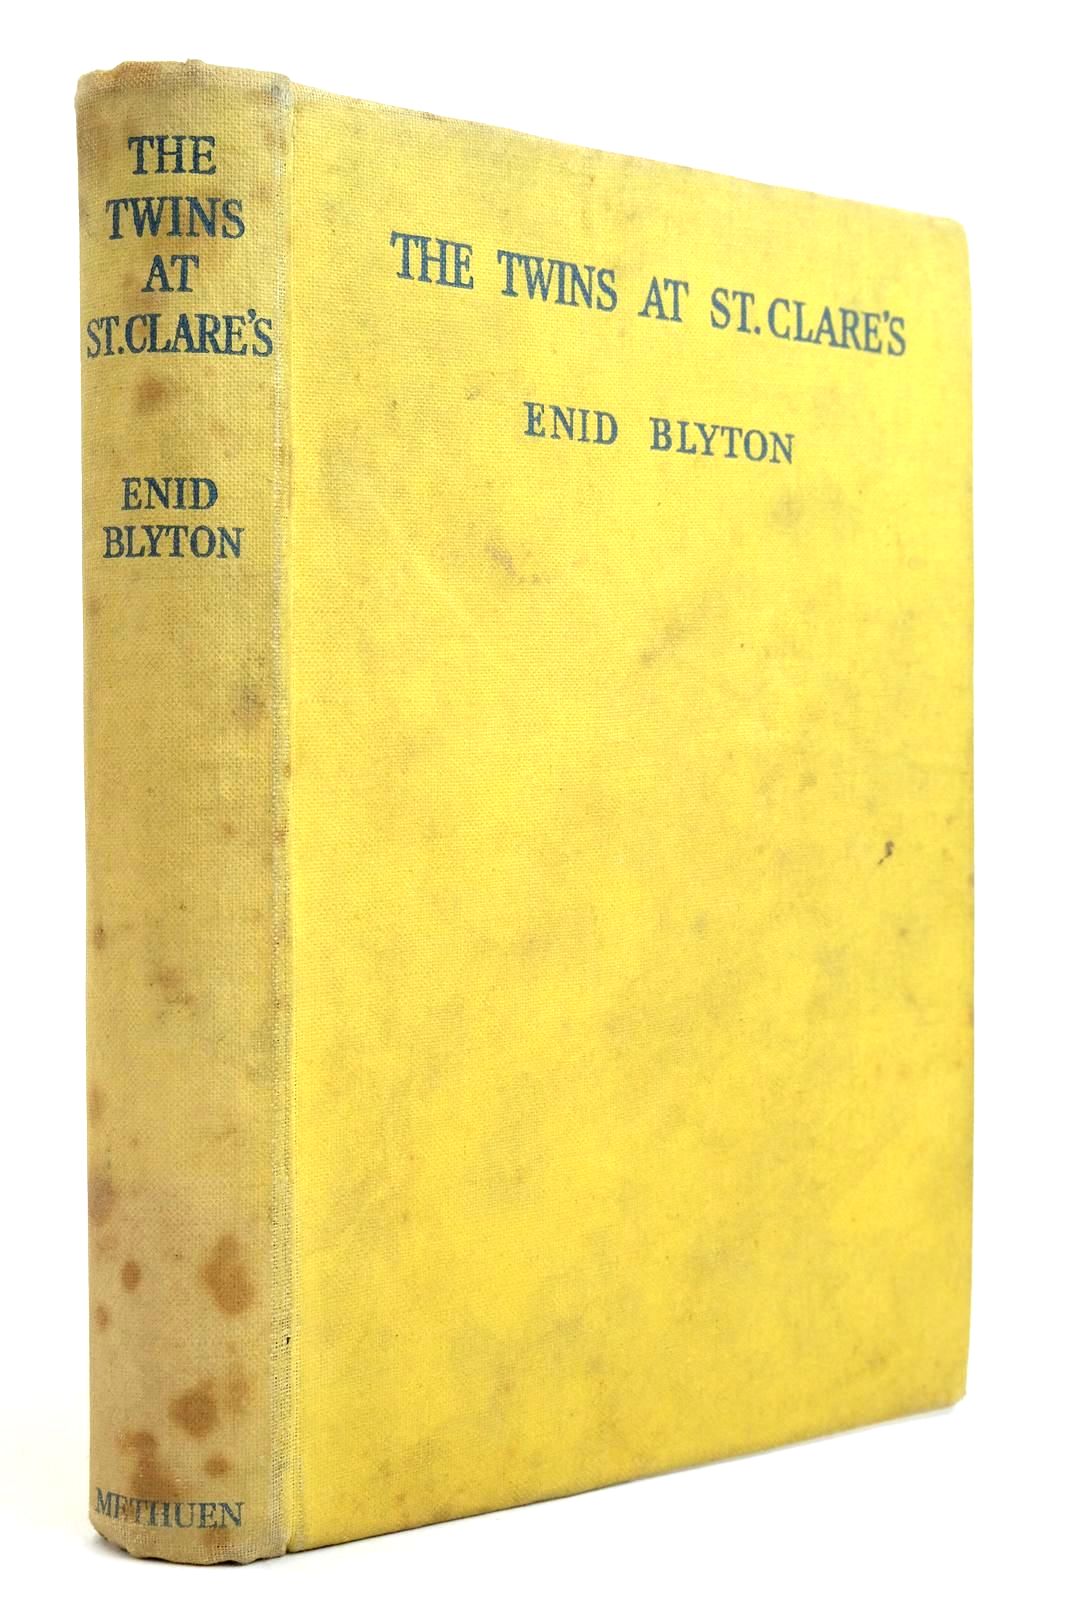 Photo of THE TWINS AT ST. CLARE'S written by Blyton, Enid illustrated by Cable, W. Lindsay published by Methuen & Co. Ltd. (STOCK CODE: 2135603)  for sale by Stella & Rose's Books